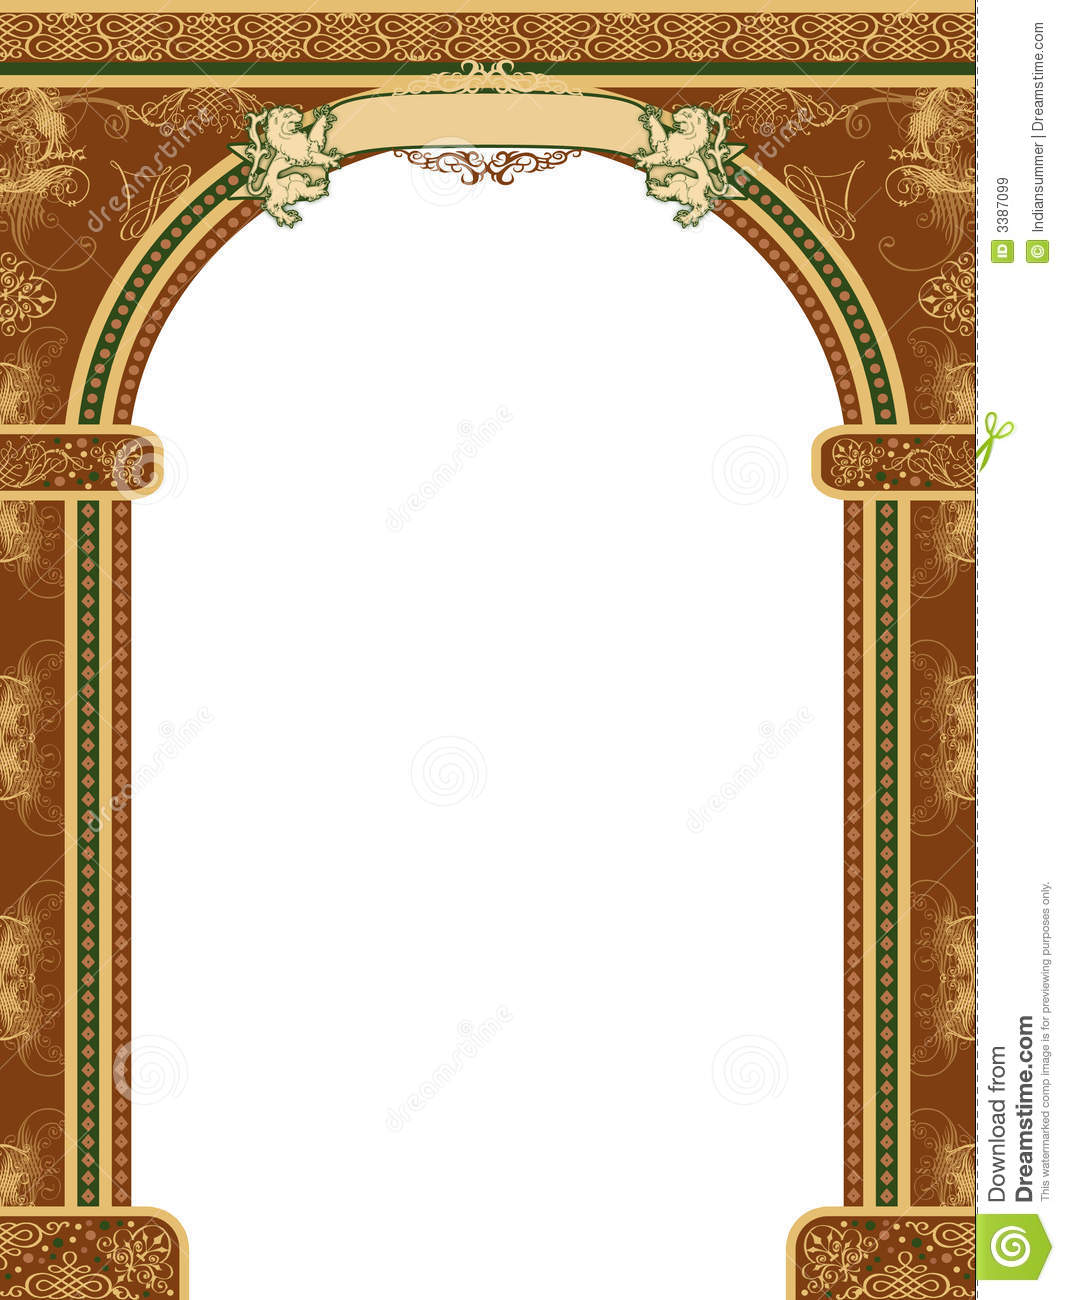 Arch With Ornaments And Banner Royalty Free Stock Images   Image    